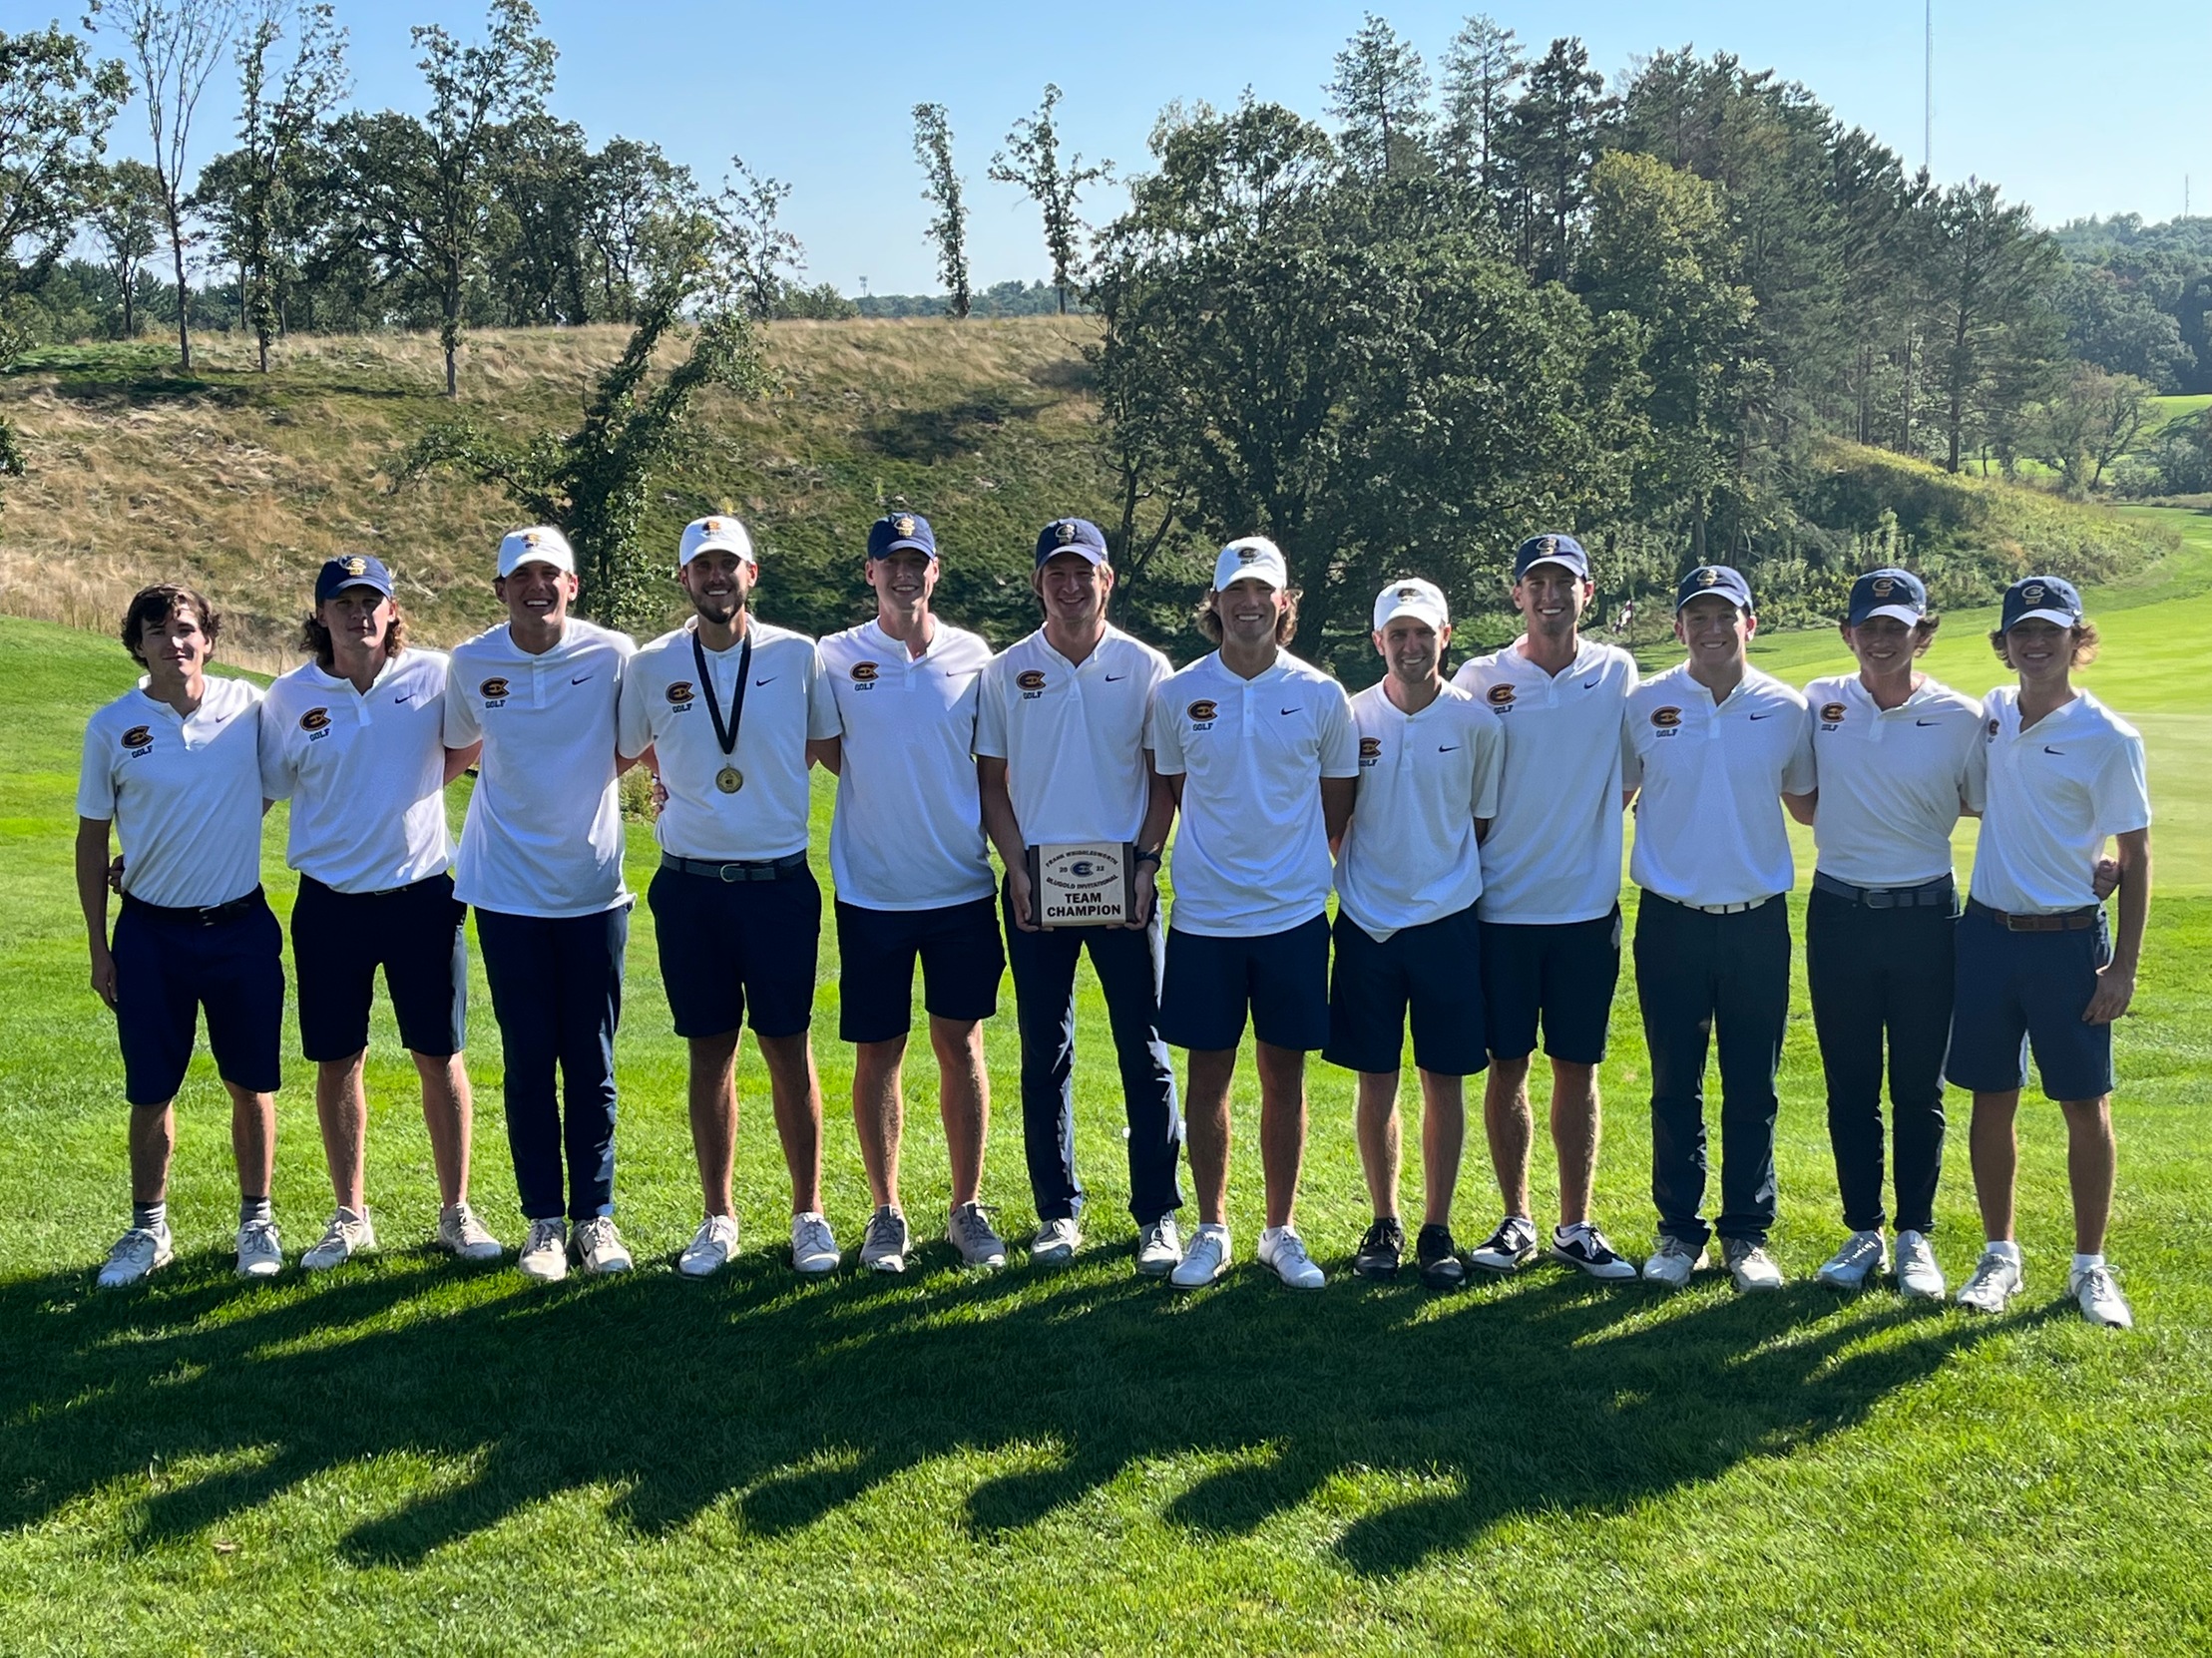 Blugolds Take Home First Place at Wrigglesworth Invitational